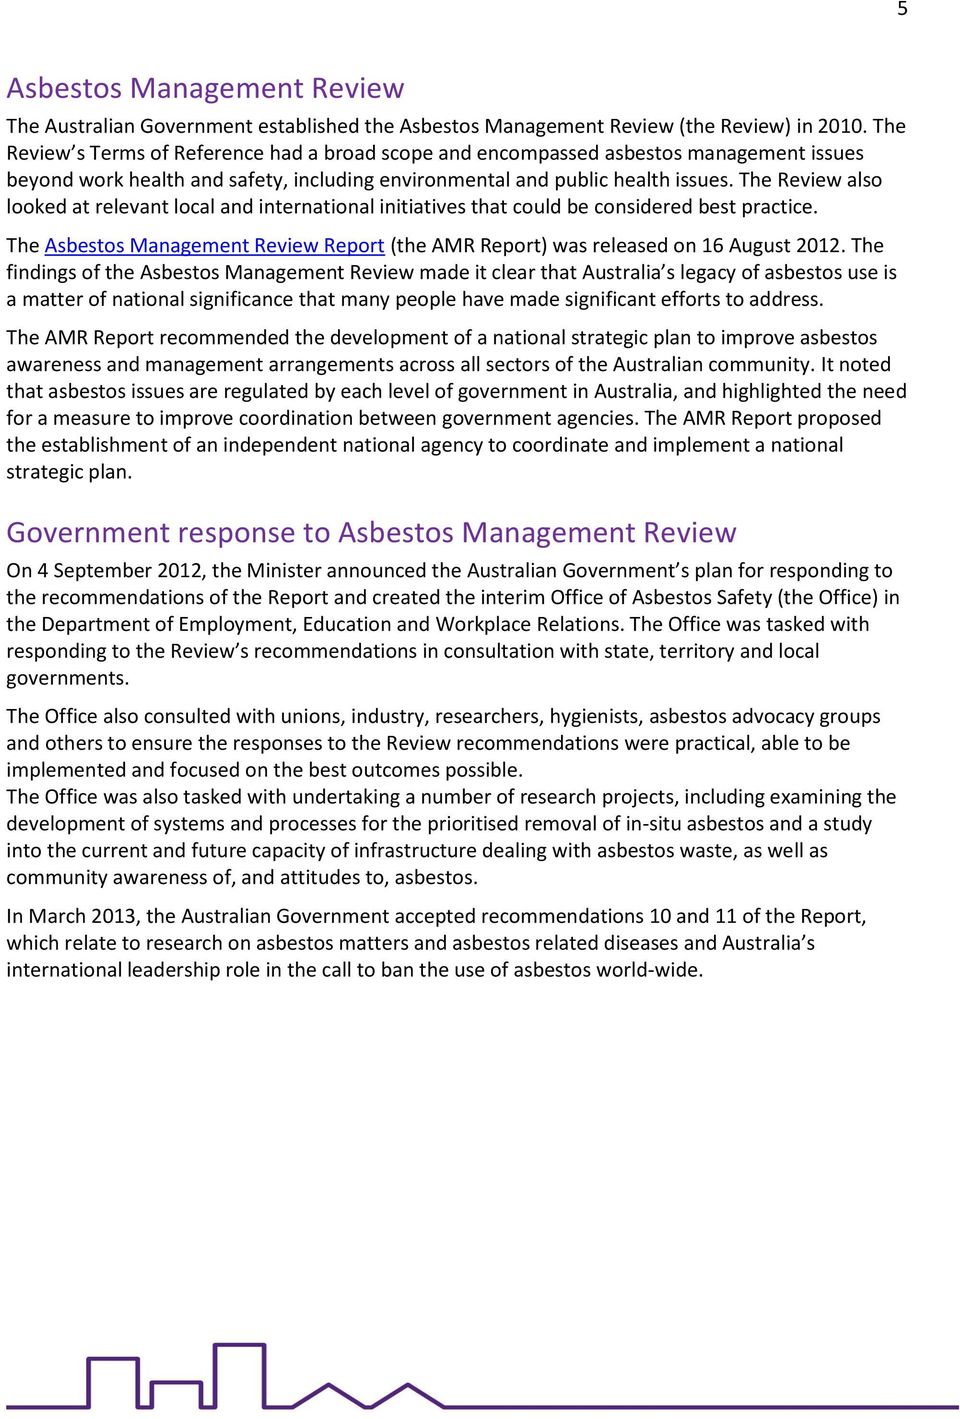 The Review also looked at relevant local and international initiatives that could be considered best practice. The Asbestos Management Review Report (the AMR Report) was released on 16 August 2012.